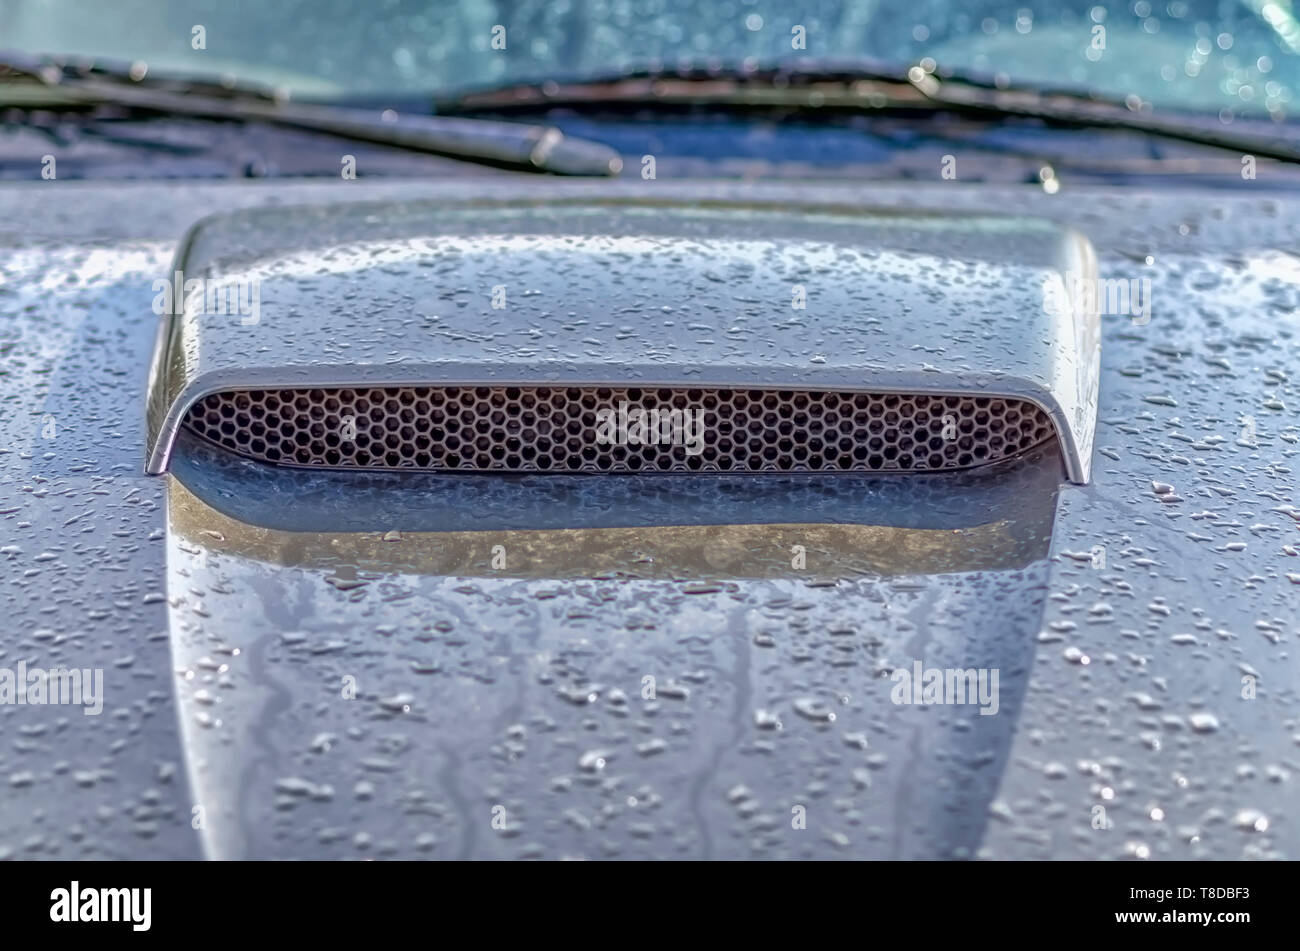 Rain water glistening/dripping off the hood/hood scoop/bonnet of a Ford Mustang GT Coupe after a summer storm. Stock Photo